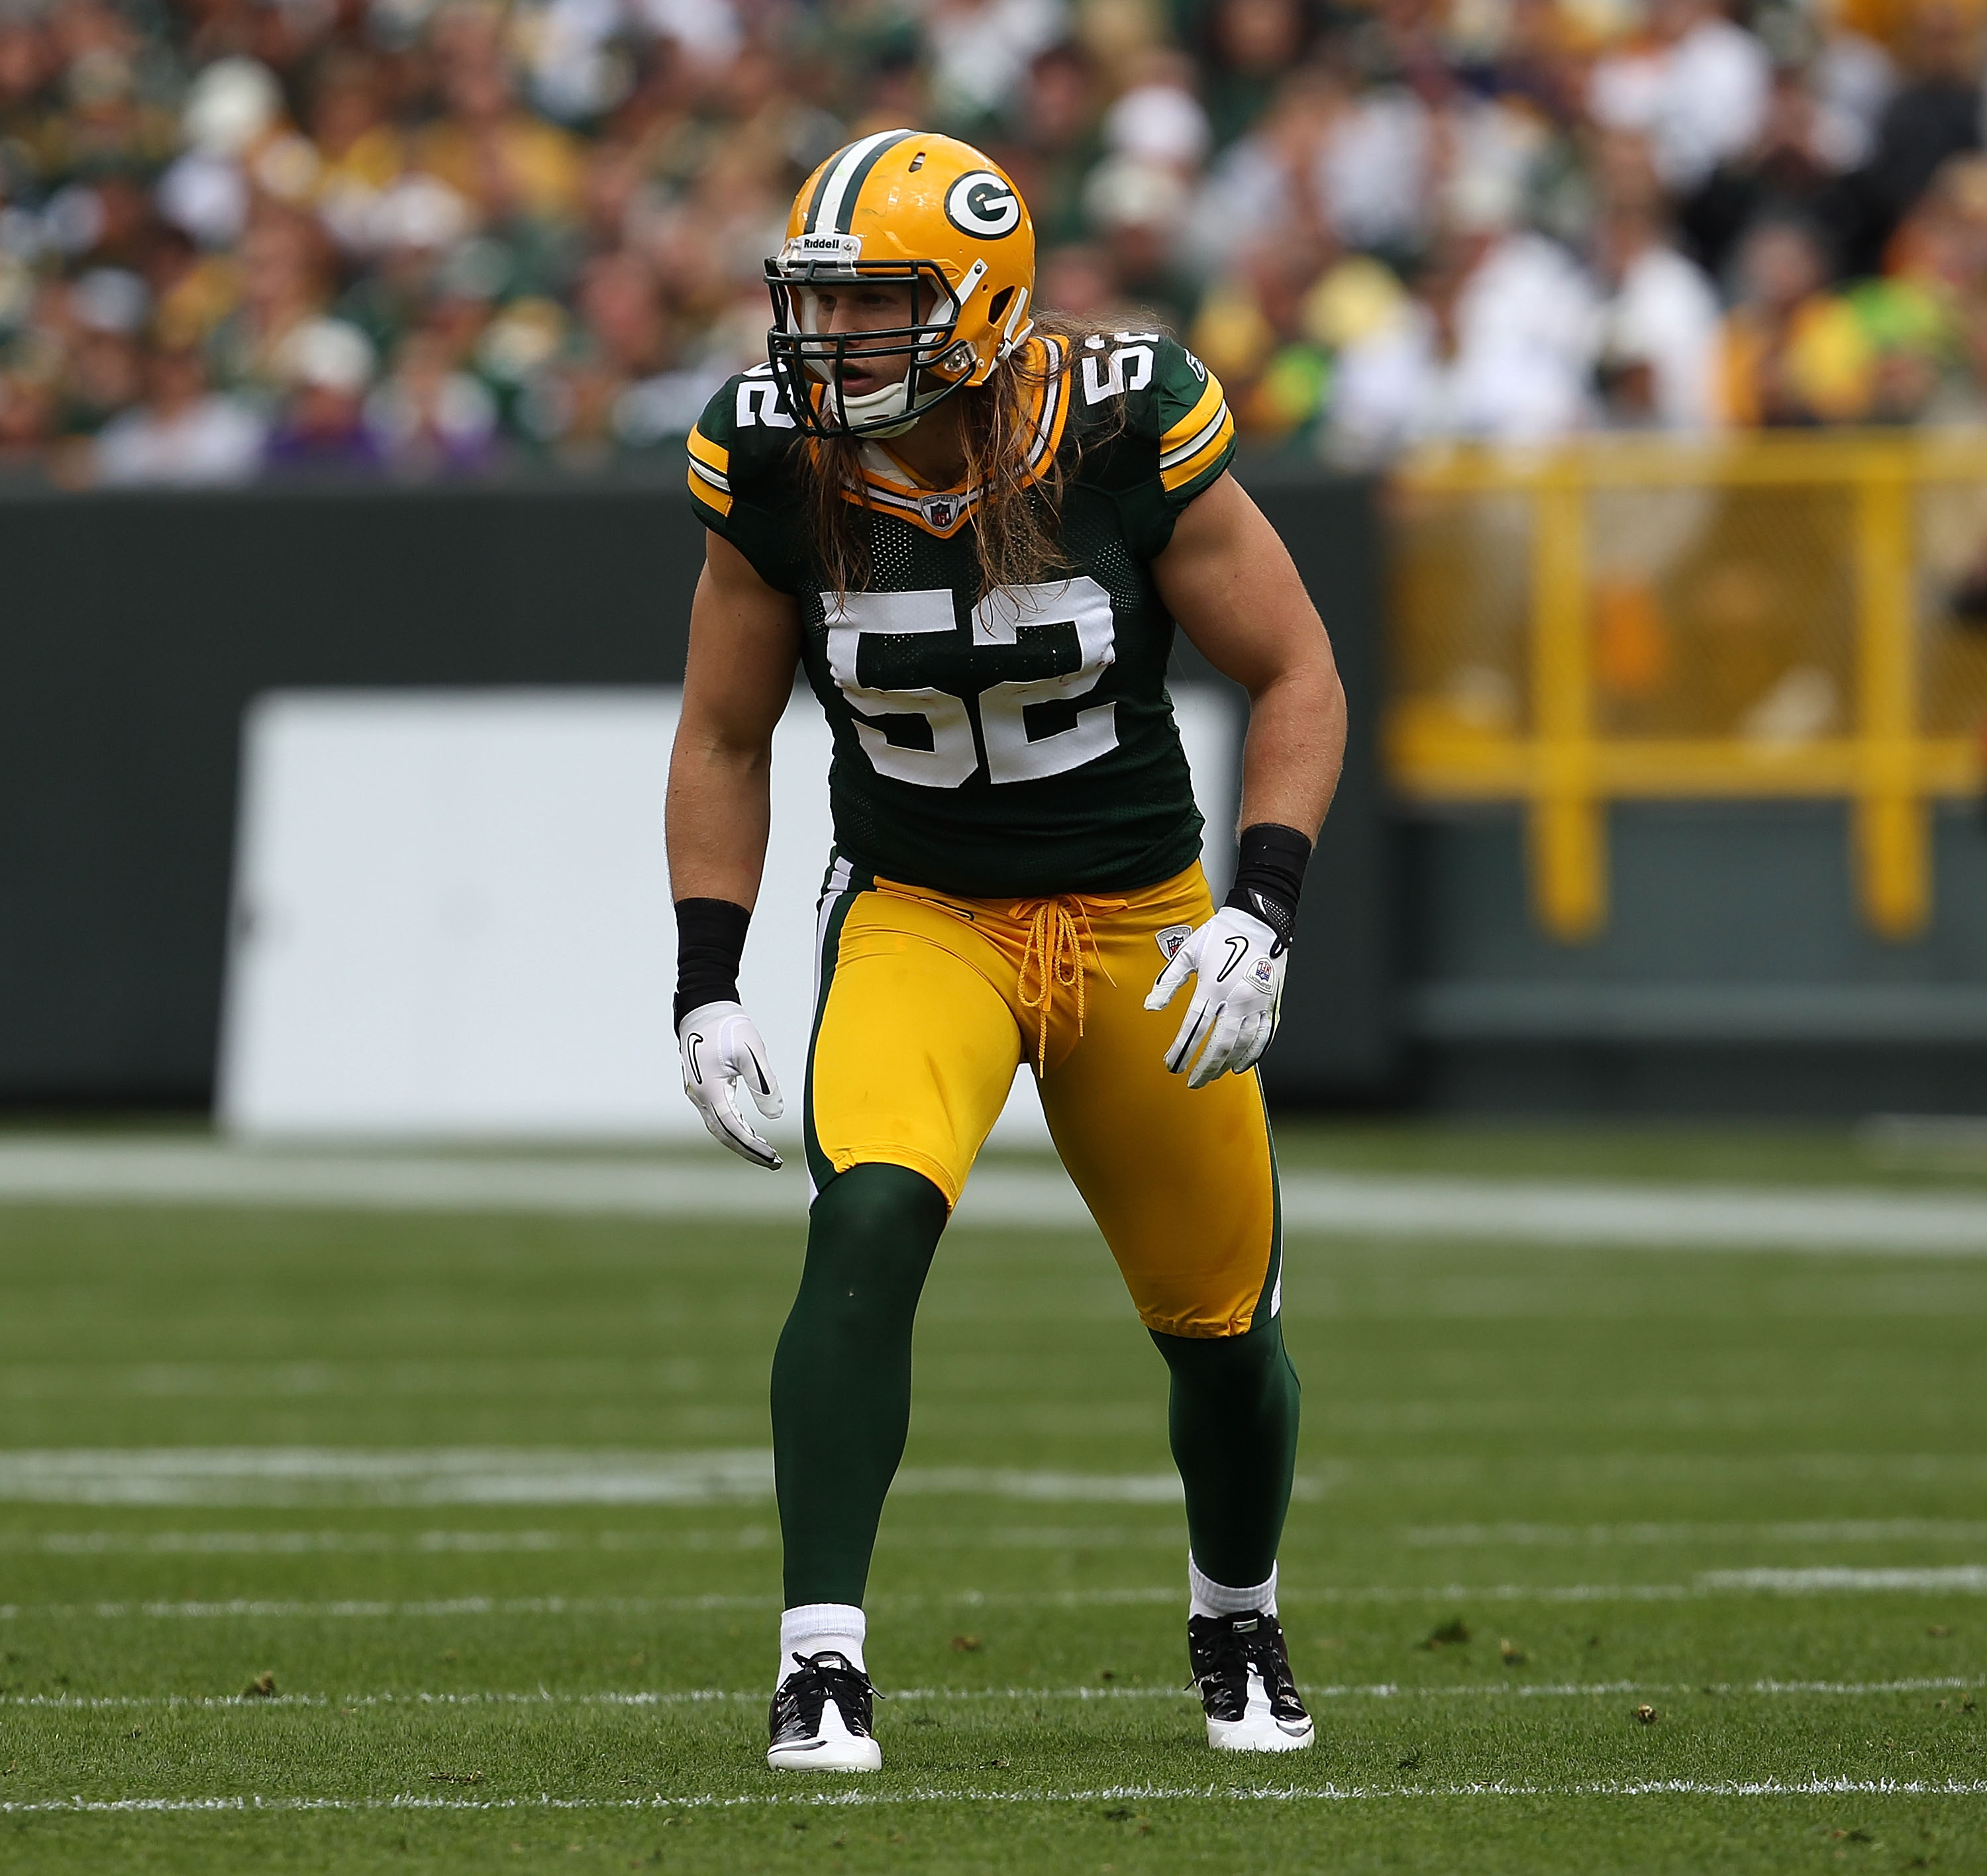 GREEN BAY, WI - SEPTEMBER 19: Clay Matthews #52 of the Green Bay Packers awaits the start of play against the Buffalo Bills at Lambeau Field on September 19, 2010 in Green Bay, Wisconsin. The Packers defeated the Bills 34-7. (Photo by Jonathan Daniel/Gett